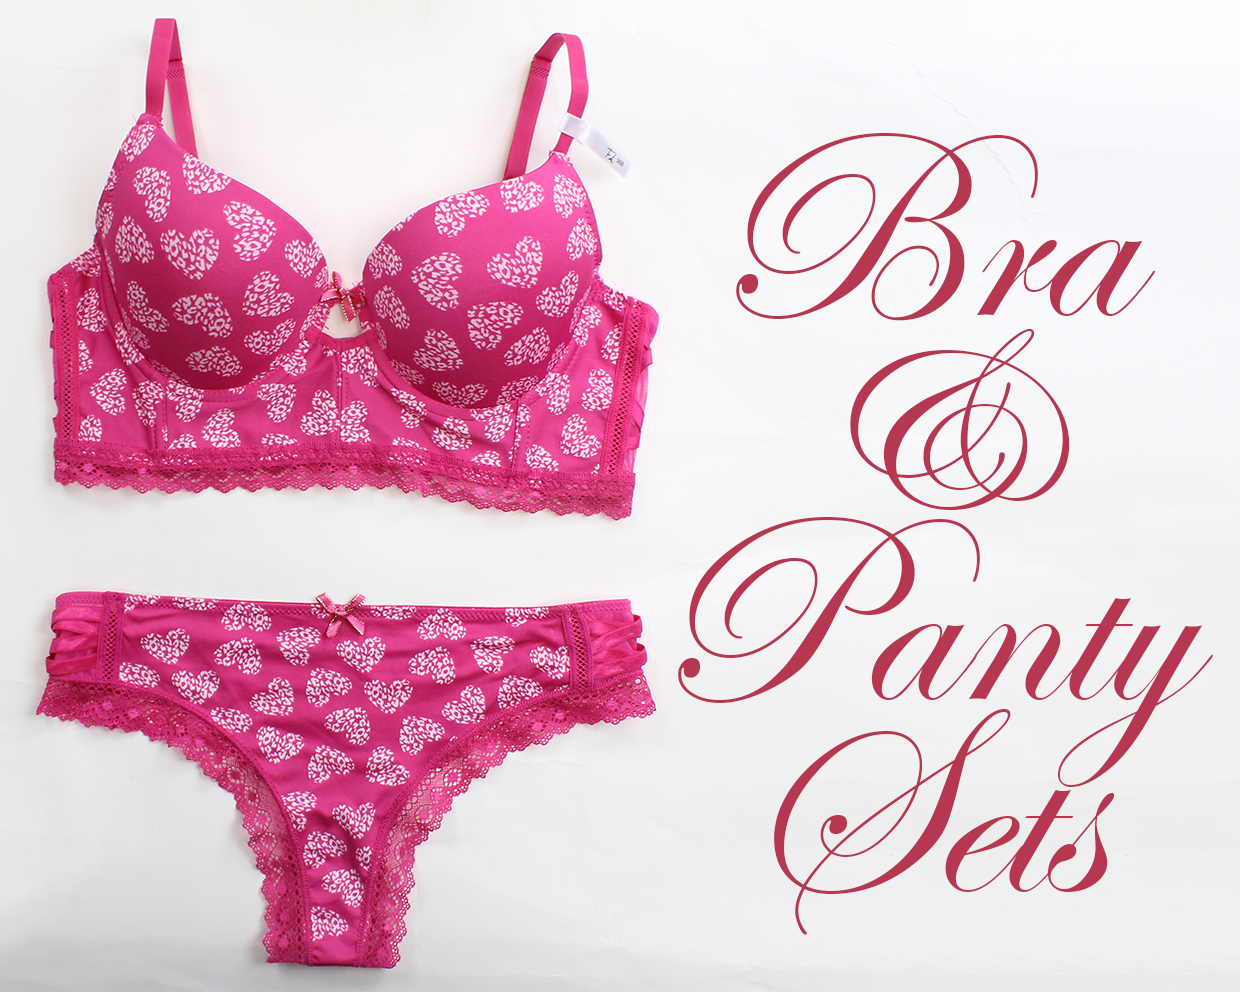 Find sexy bra and panty sets suitable for Valentine's Day at Melrose!